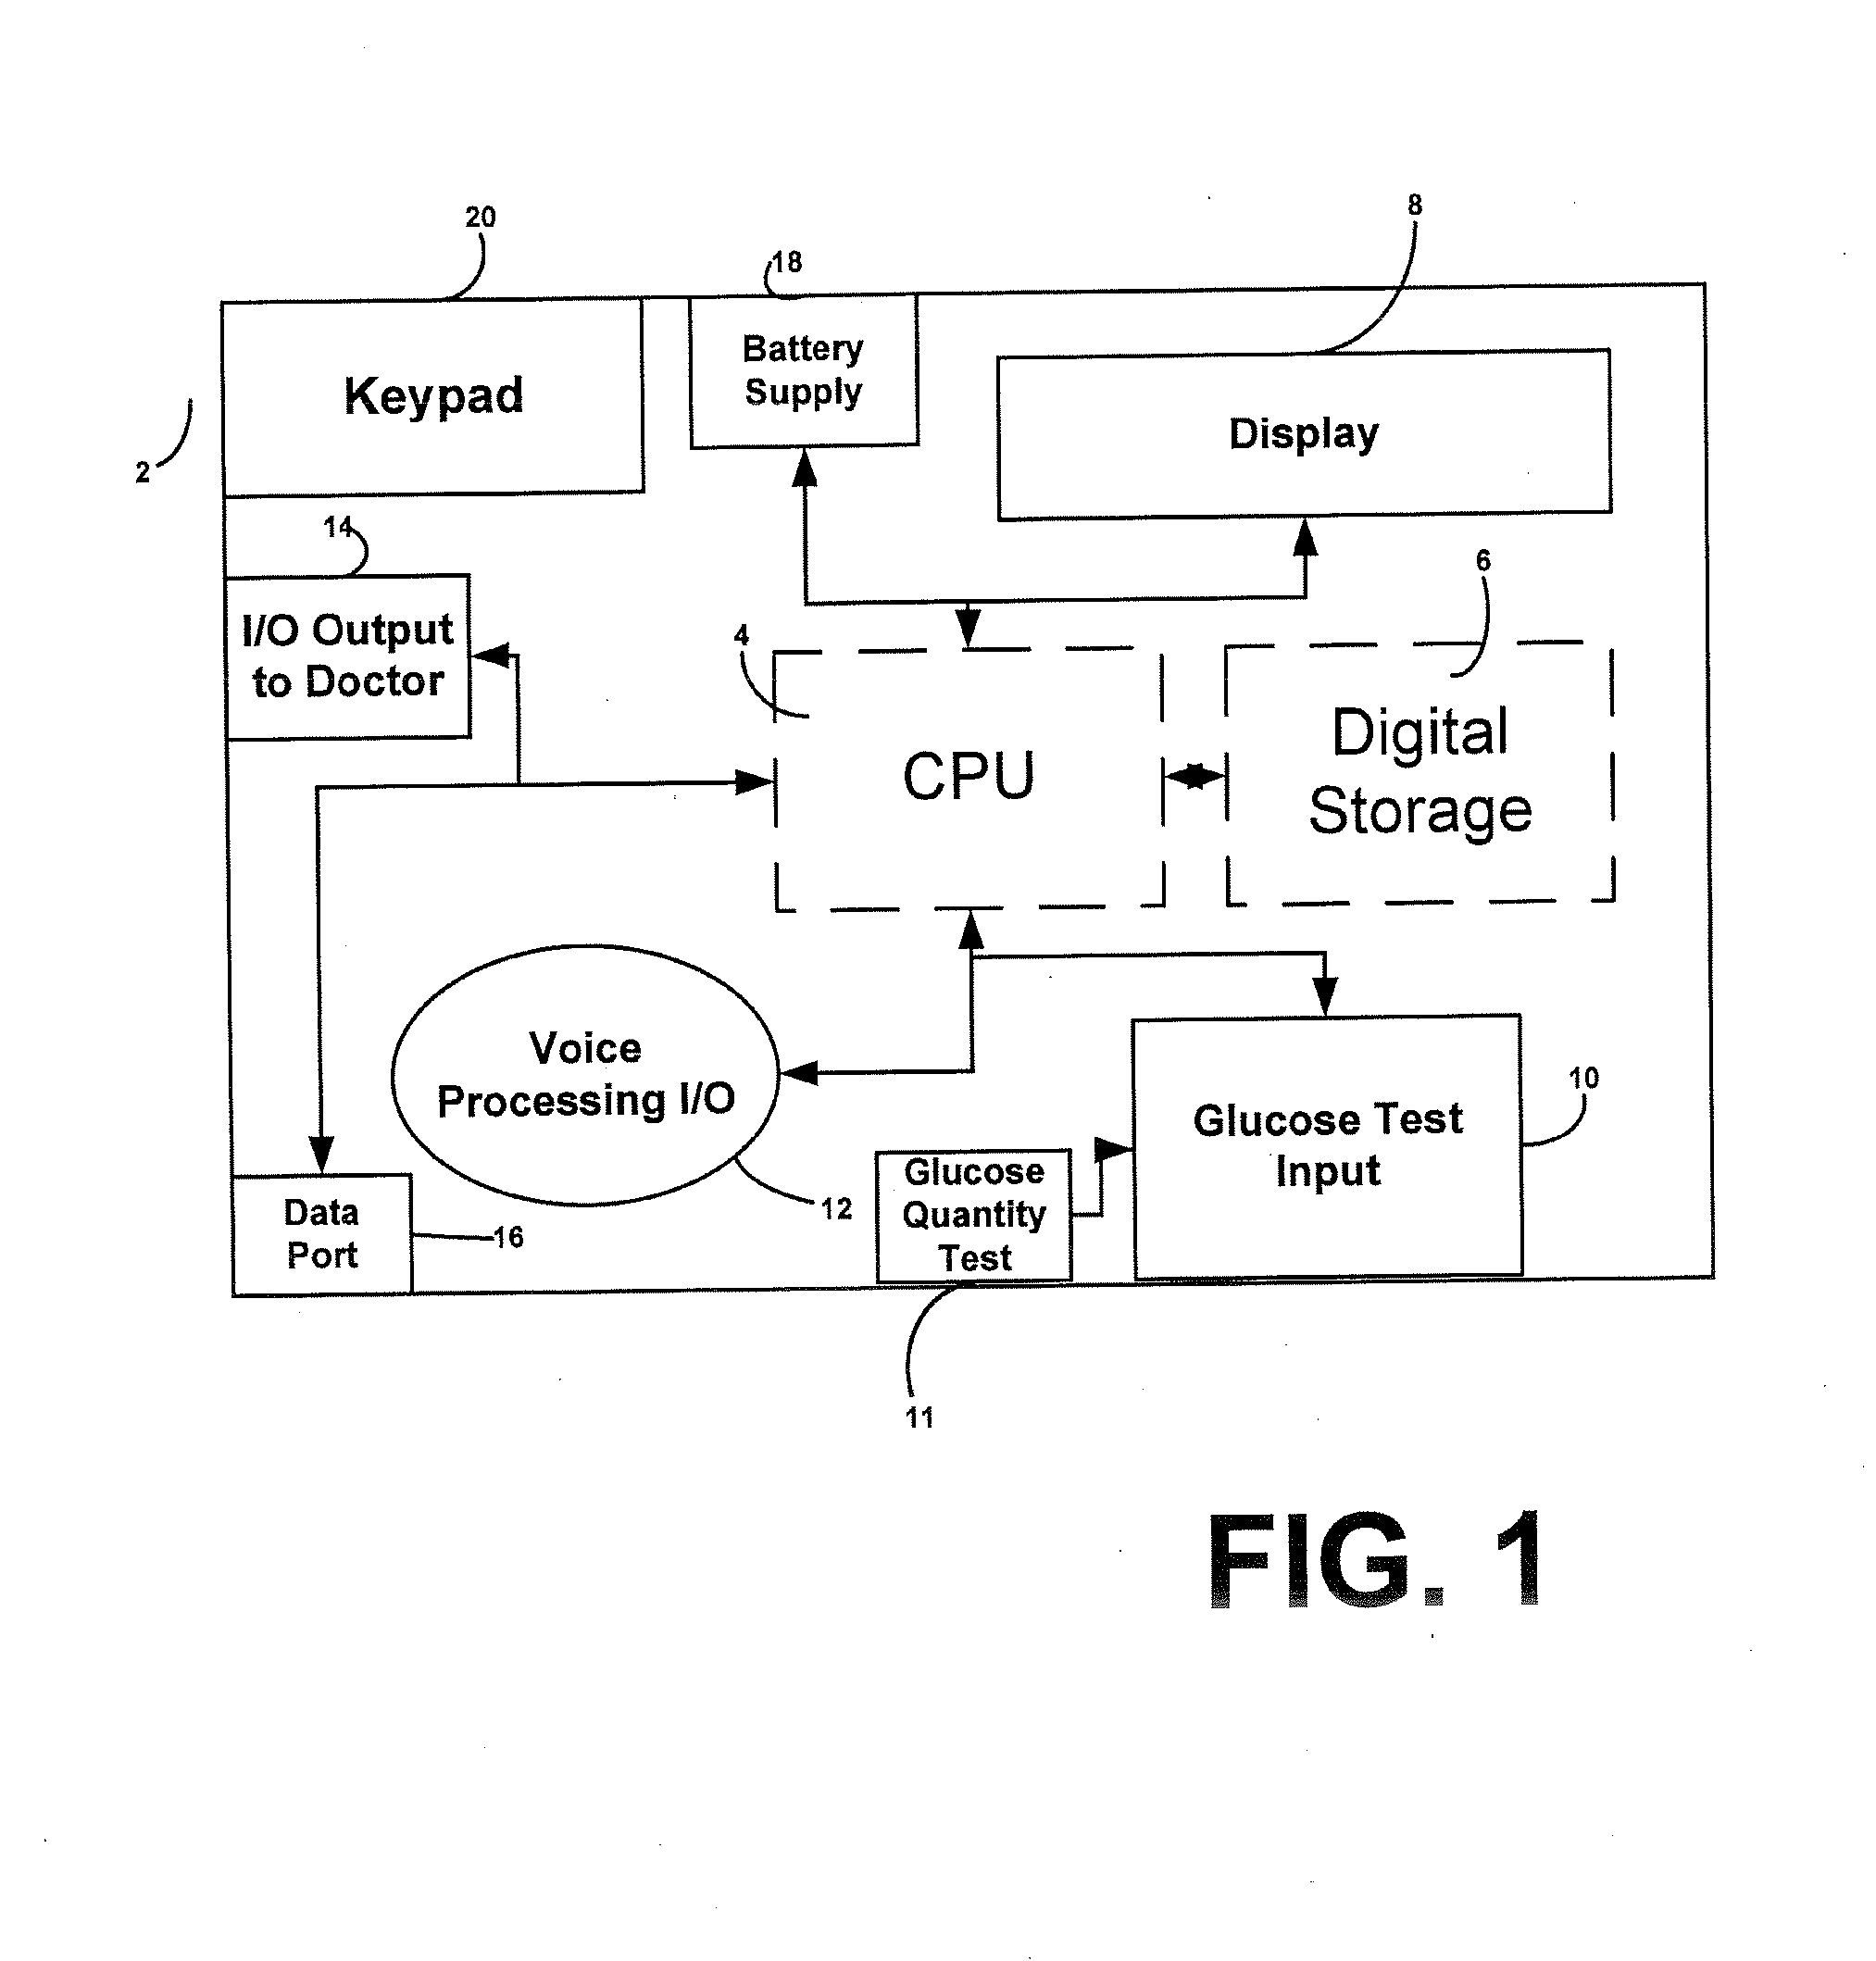 Interactive device for monitoring and reporting glucose levels